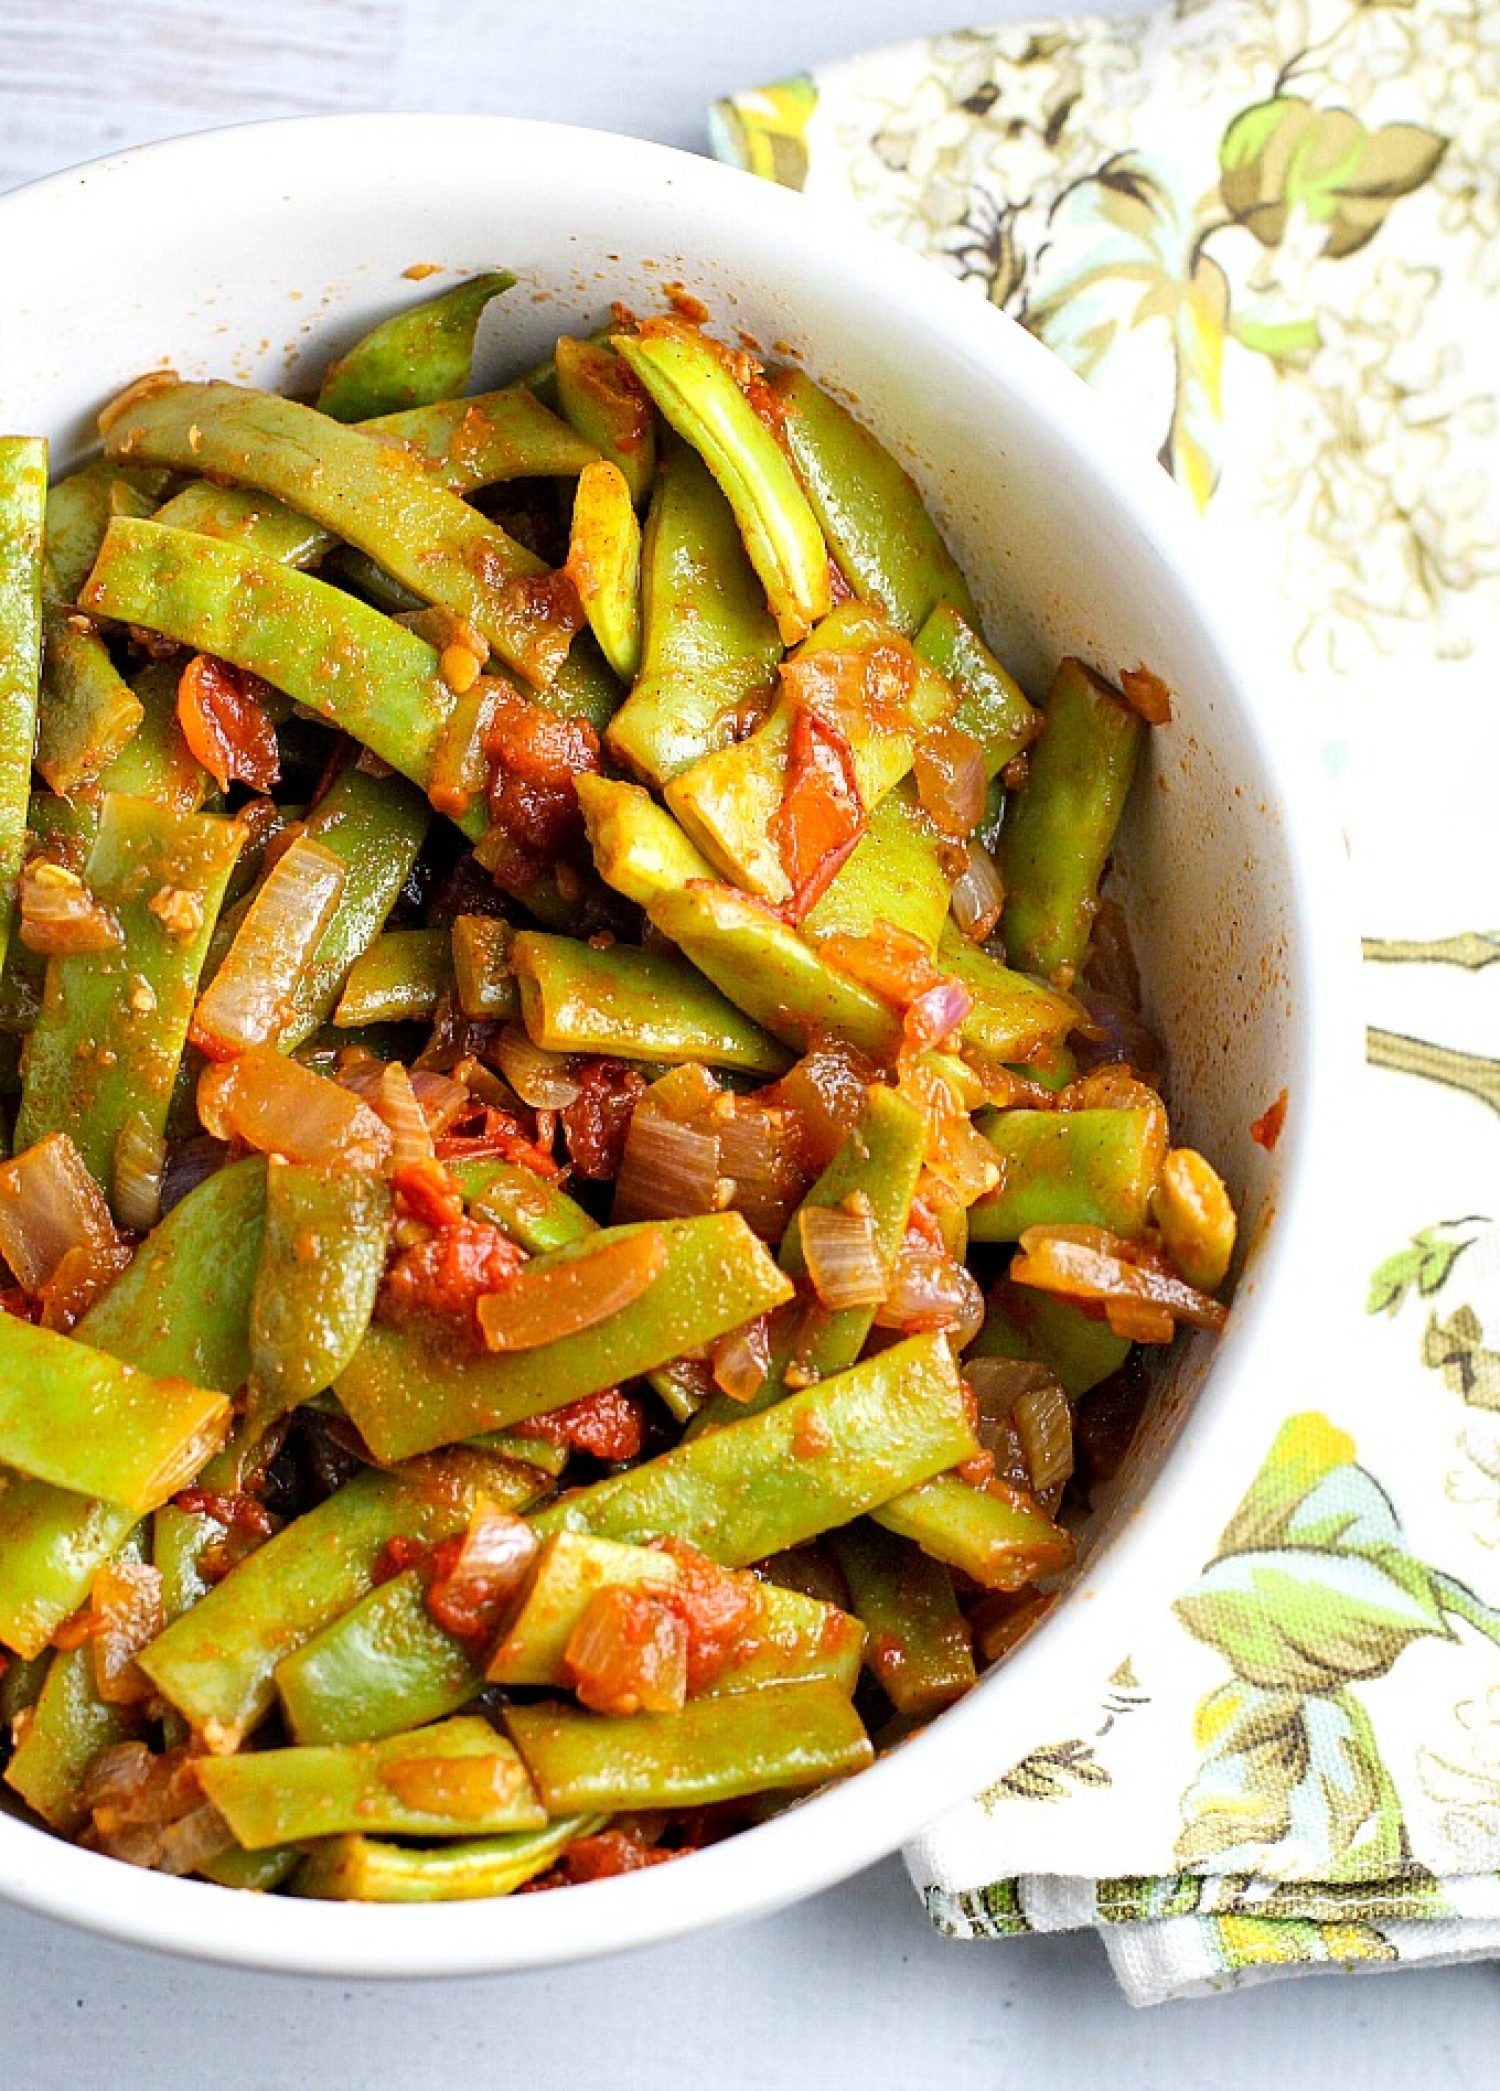 <p><strong><span>Romano beans, also known as Italian flat beans are infused with subtle yet delicious Middle Eastern flavors in <a href="https://www.adishofdailylife.com/2016/08/romano-beans-tomatoes-middle-eastern/" rel="noopener">this straightforward recipe.</a> Once you've got your aromatics going, you add the beans and simmer them with tomatoes and water, then add spices and season to taste. </span></strong></p>